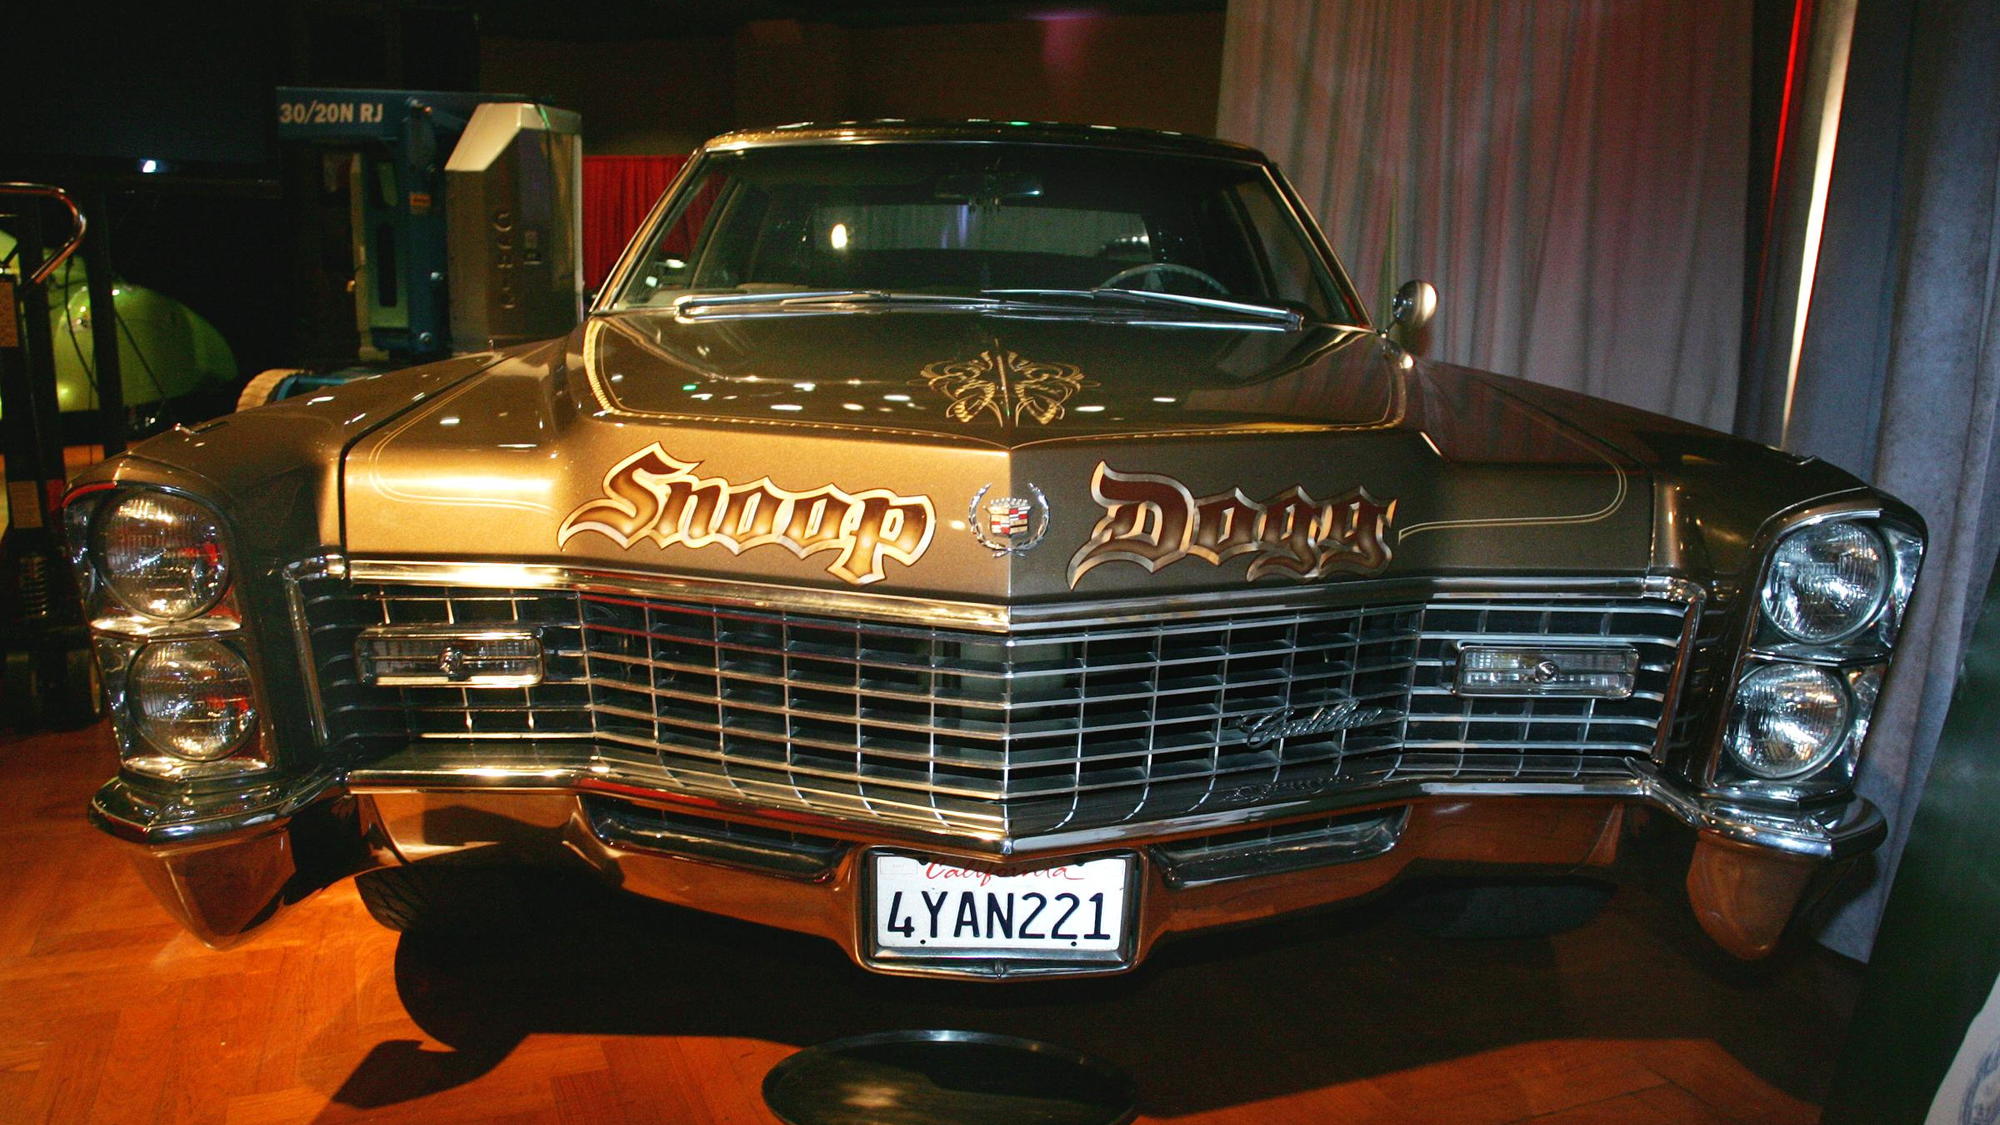 Snoop Dogg's 1967 Cadillac, Brown Sugar, from The News Herald